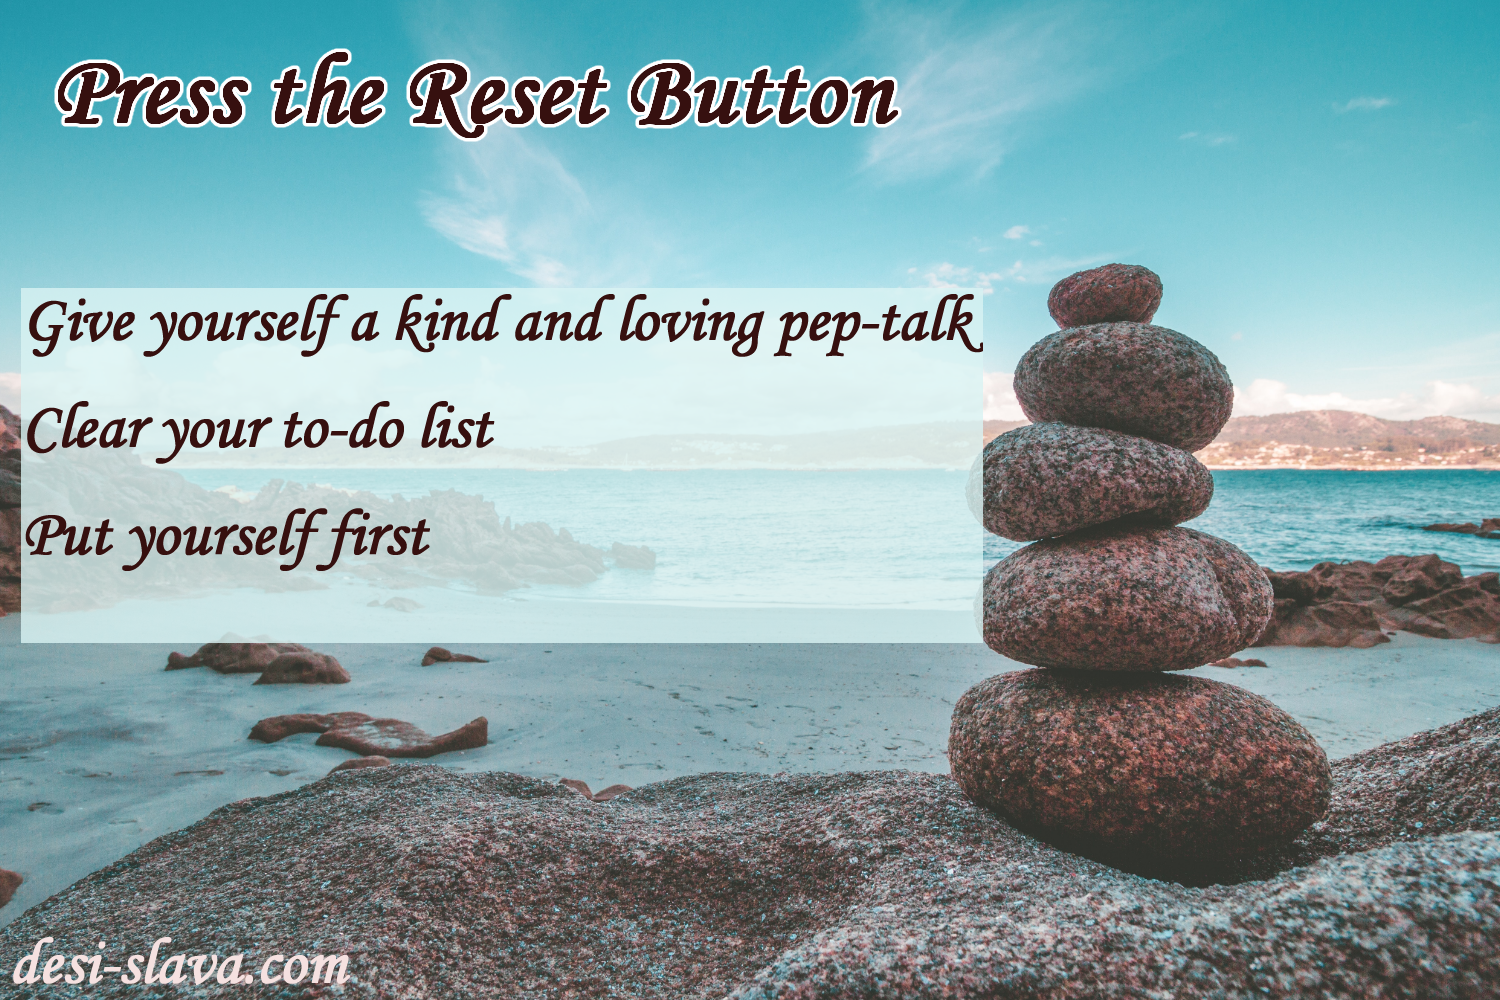 How to Press the Reset Button